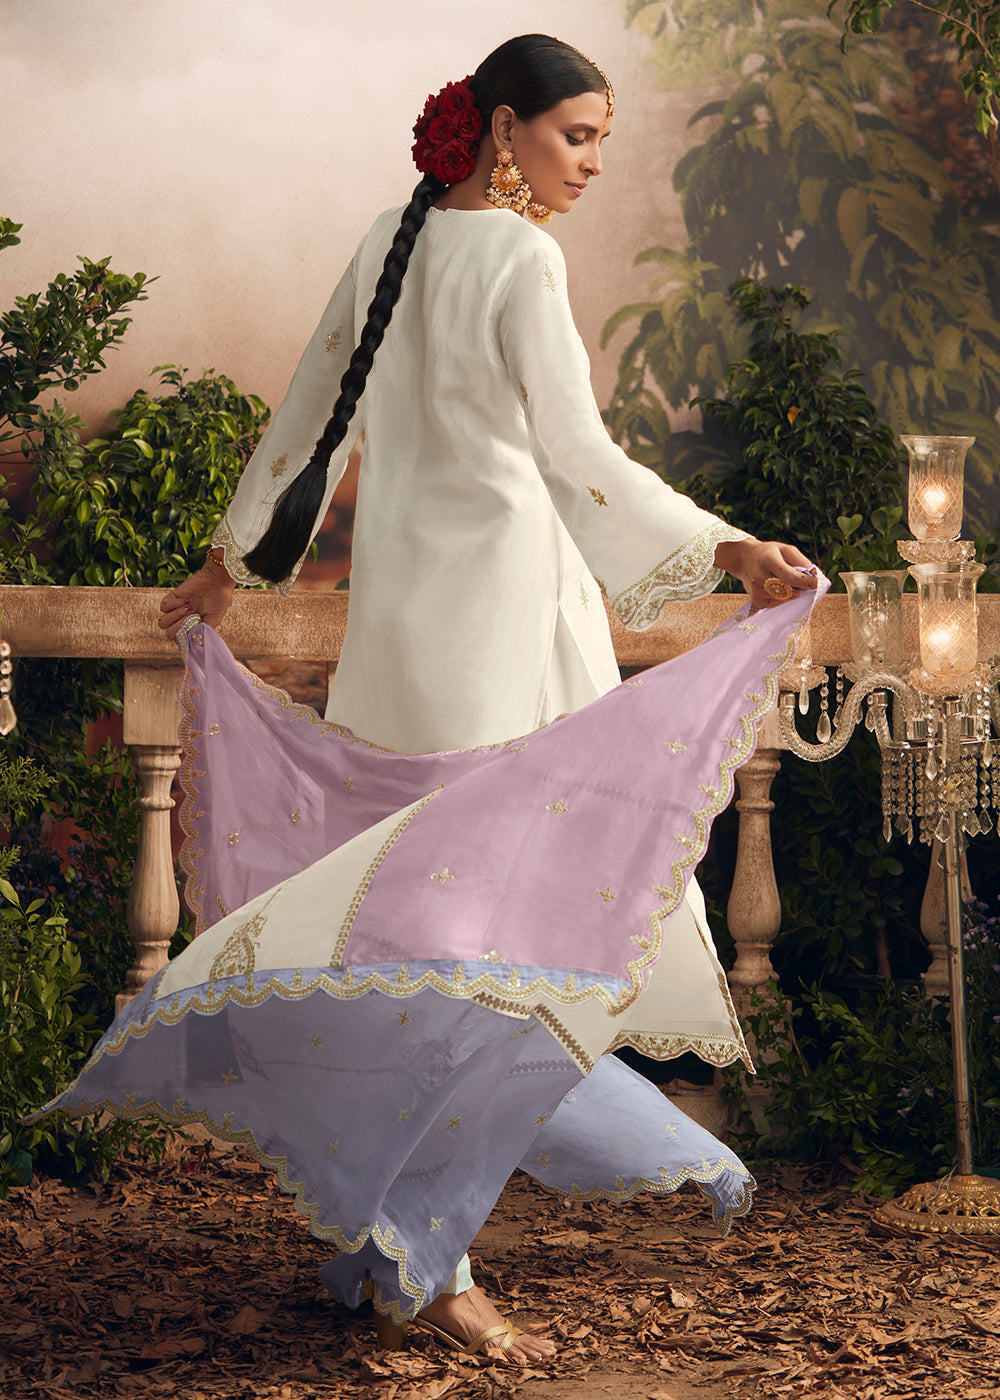 Buy Now Silk Modale Off White Embroidered Festive Salwar Suit Online in USA, UK, Canada, Germany, Australia & Worldwide at Empress Clothing.